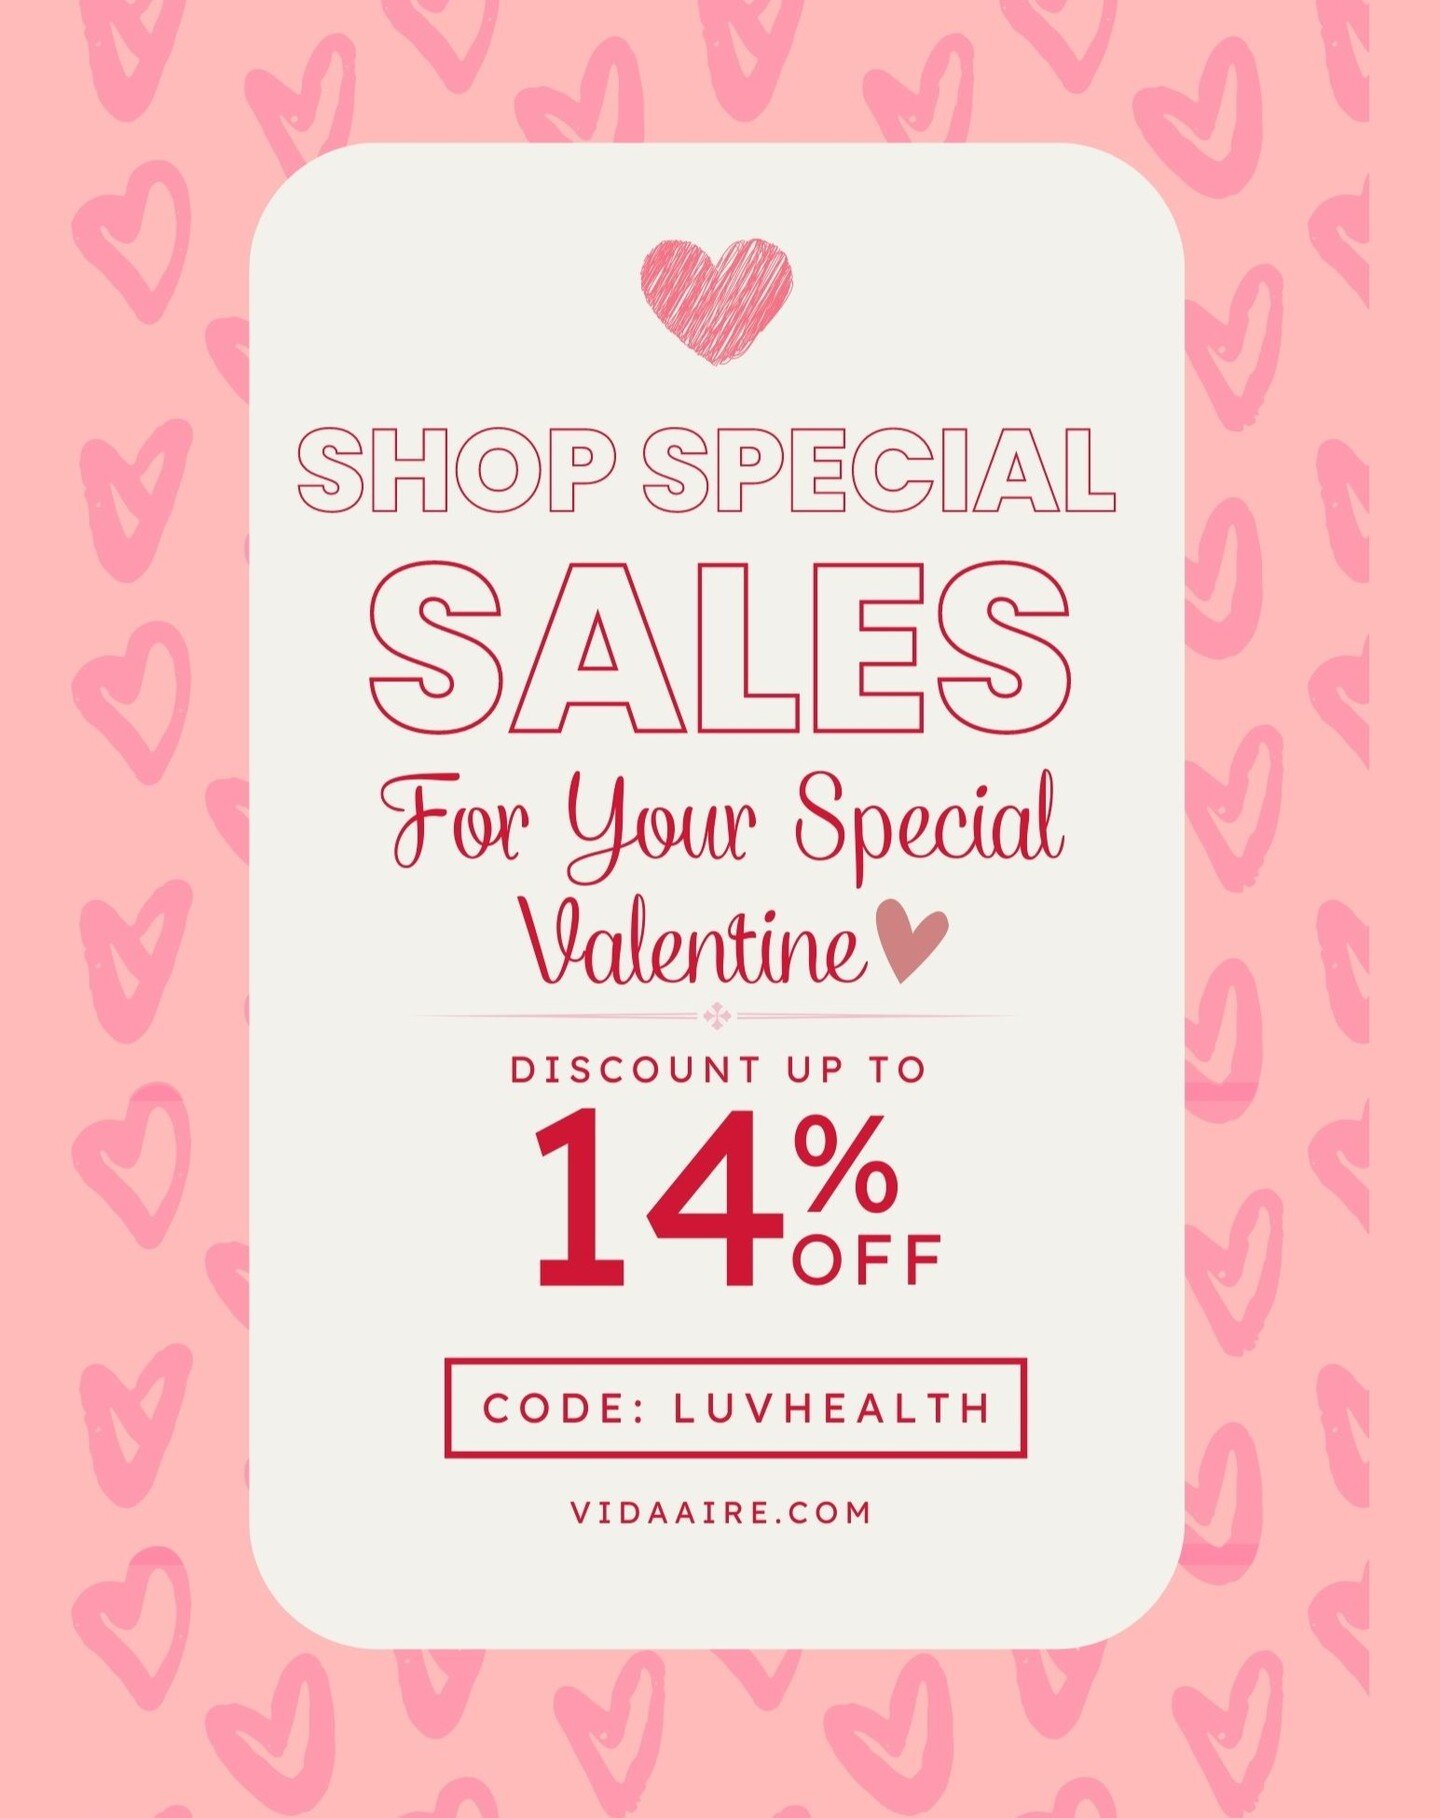 ❤️ Happy Valentines Day! Shop Special Sales for your special Valentine! 14% Off Code: LUVHEALTH ❤️